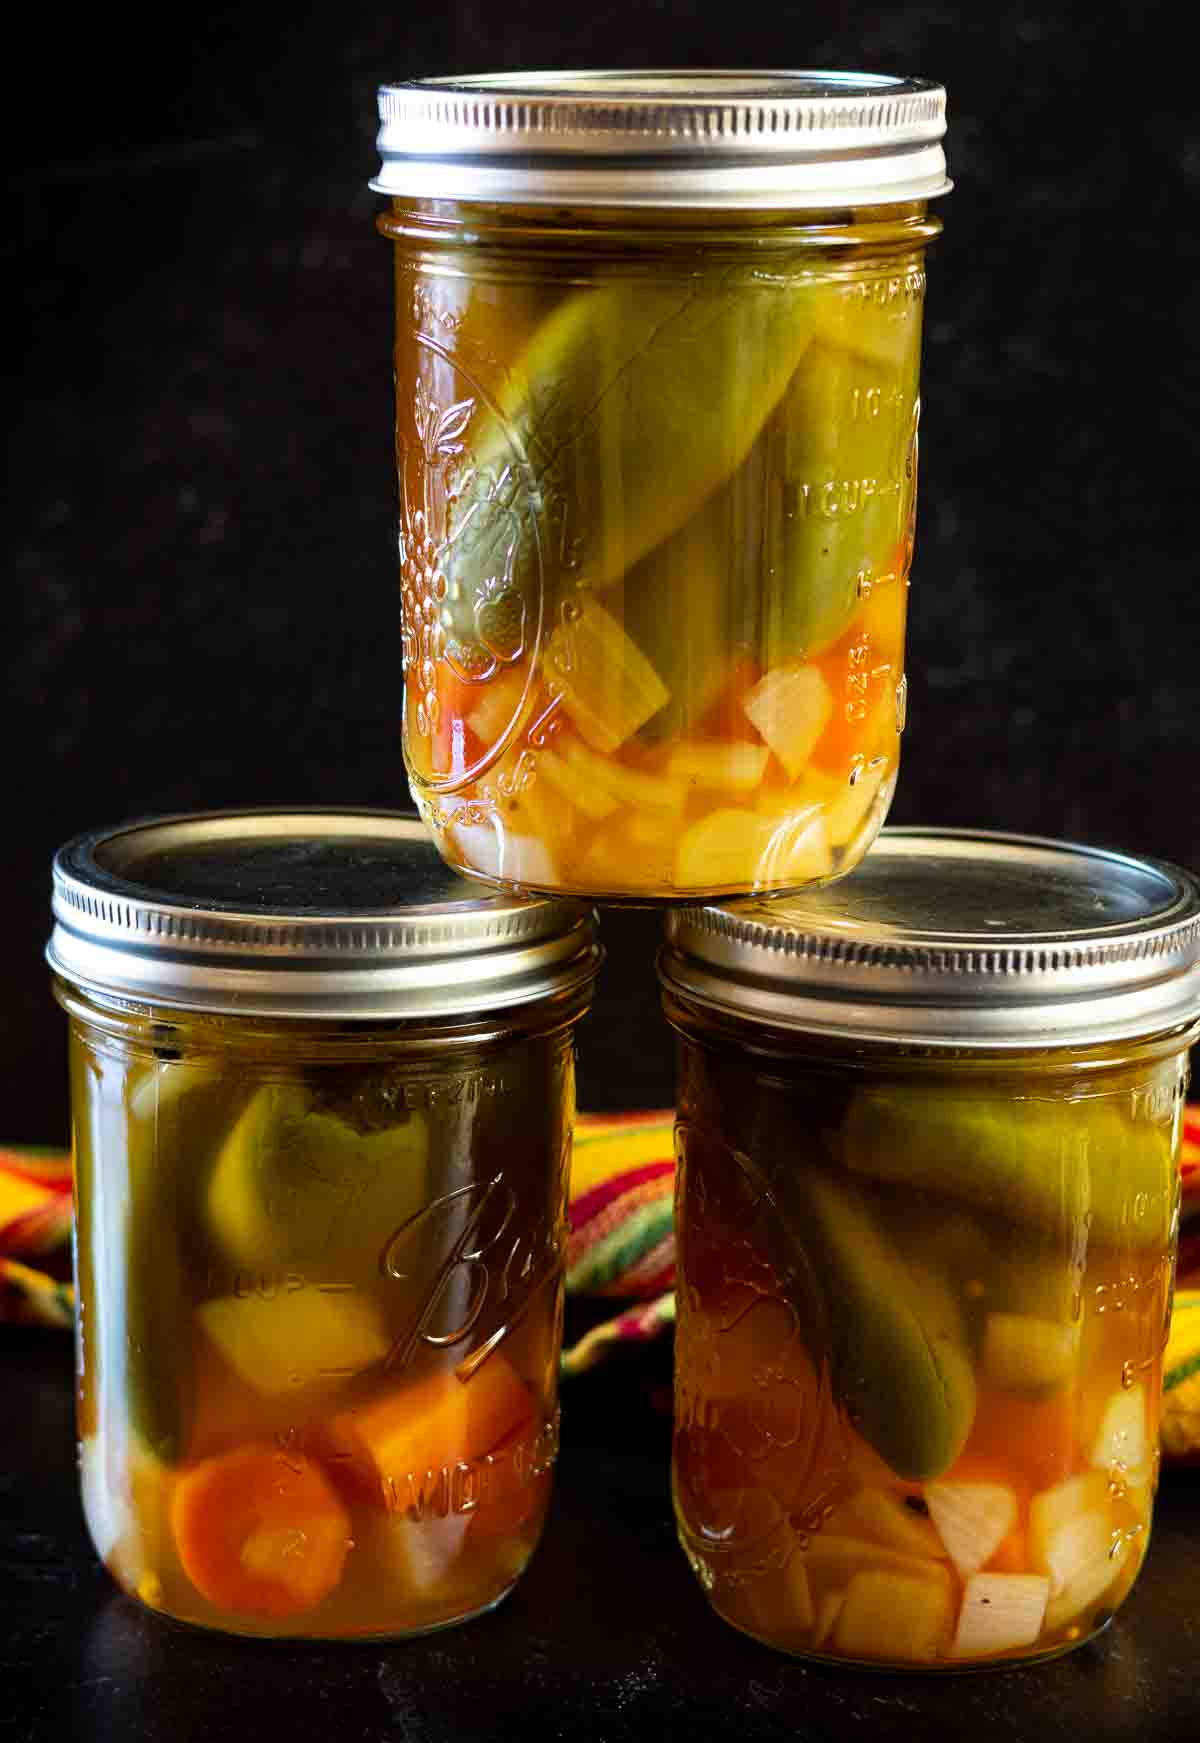 3 jars of refrigerator pickled jalapenos with carrots and onions.